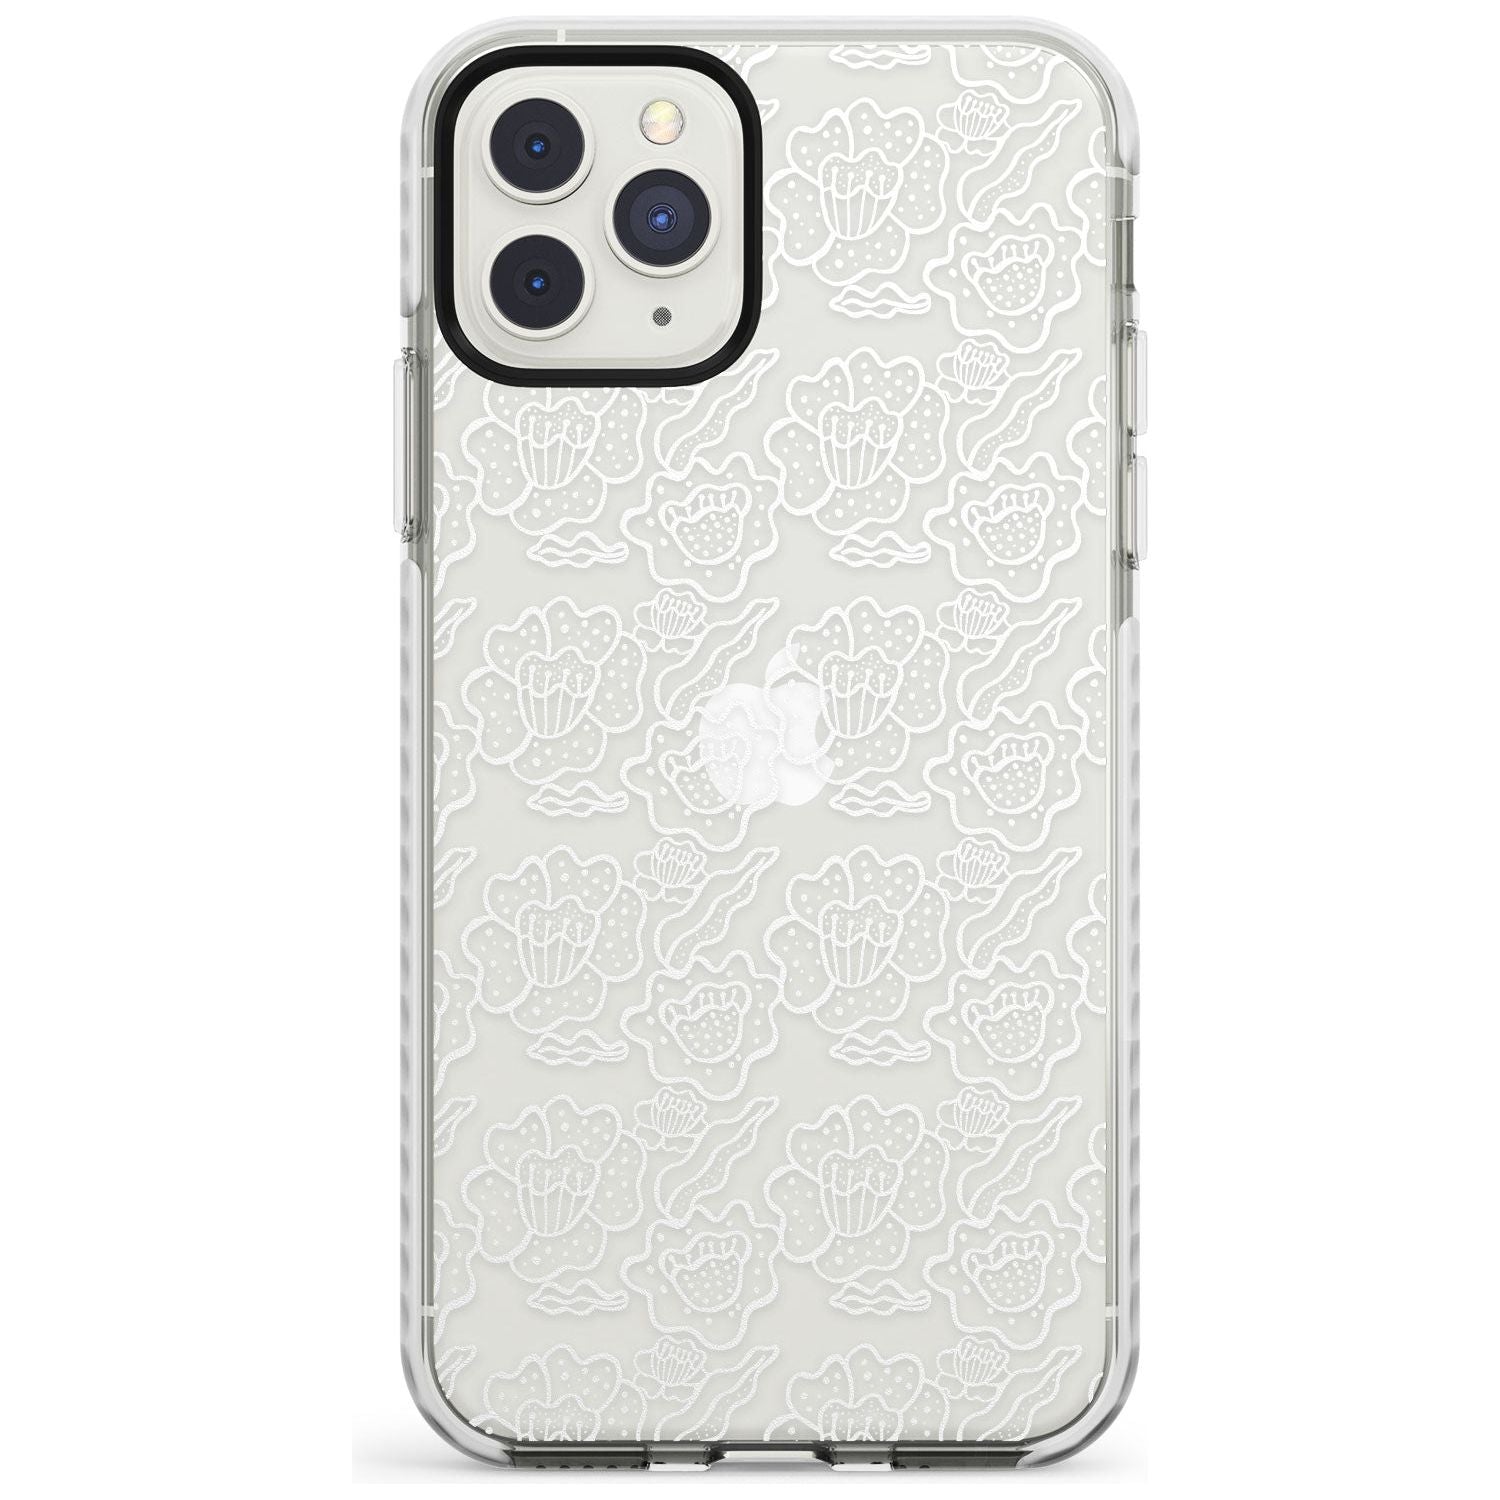 Funky Floral Patterns White on Clear Impact Phone Case for iPhone 11 Pro Max